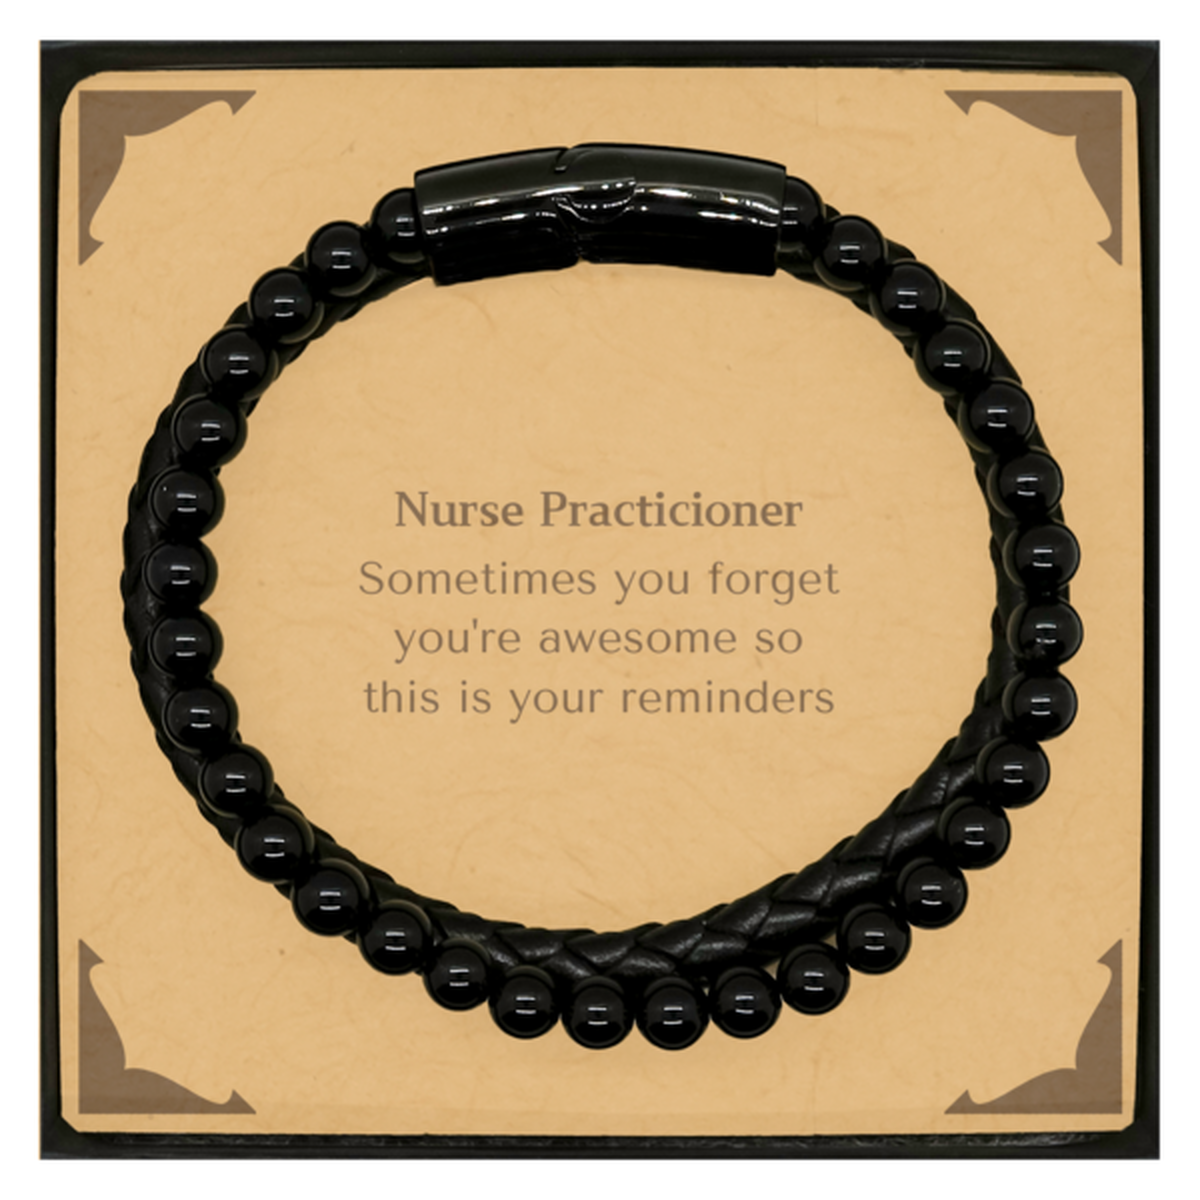 Sentimental Nurse Practicioner Stone Leather Bracelets, Nurse Practicioner Sometimes you forget you're awesome so this is your reminders, Graduation Christmas Birthday Gifts for Nurse Practicioner, Men, Women, Coworkers